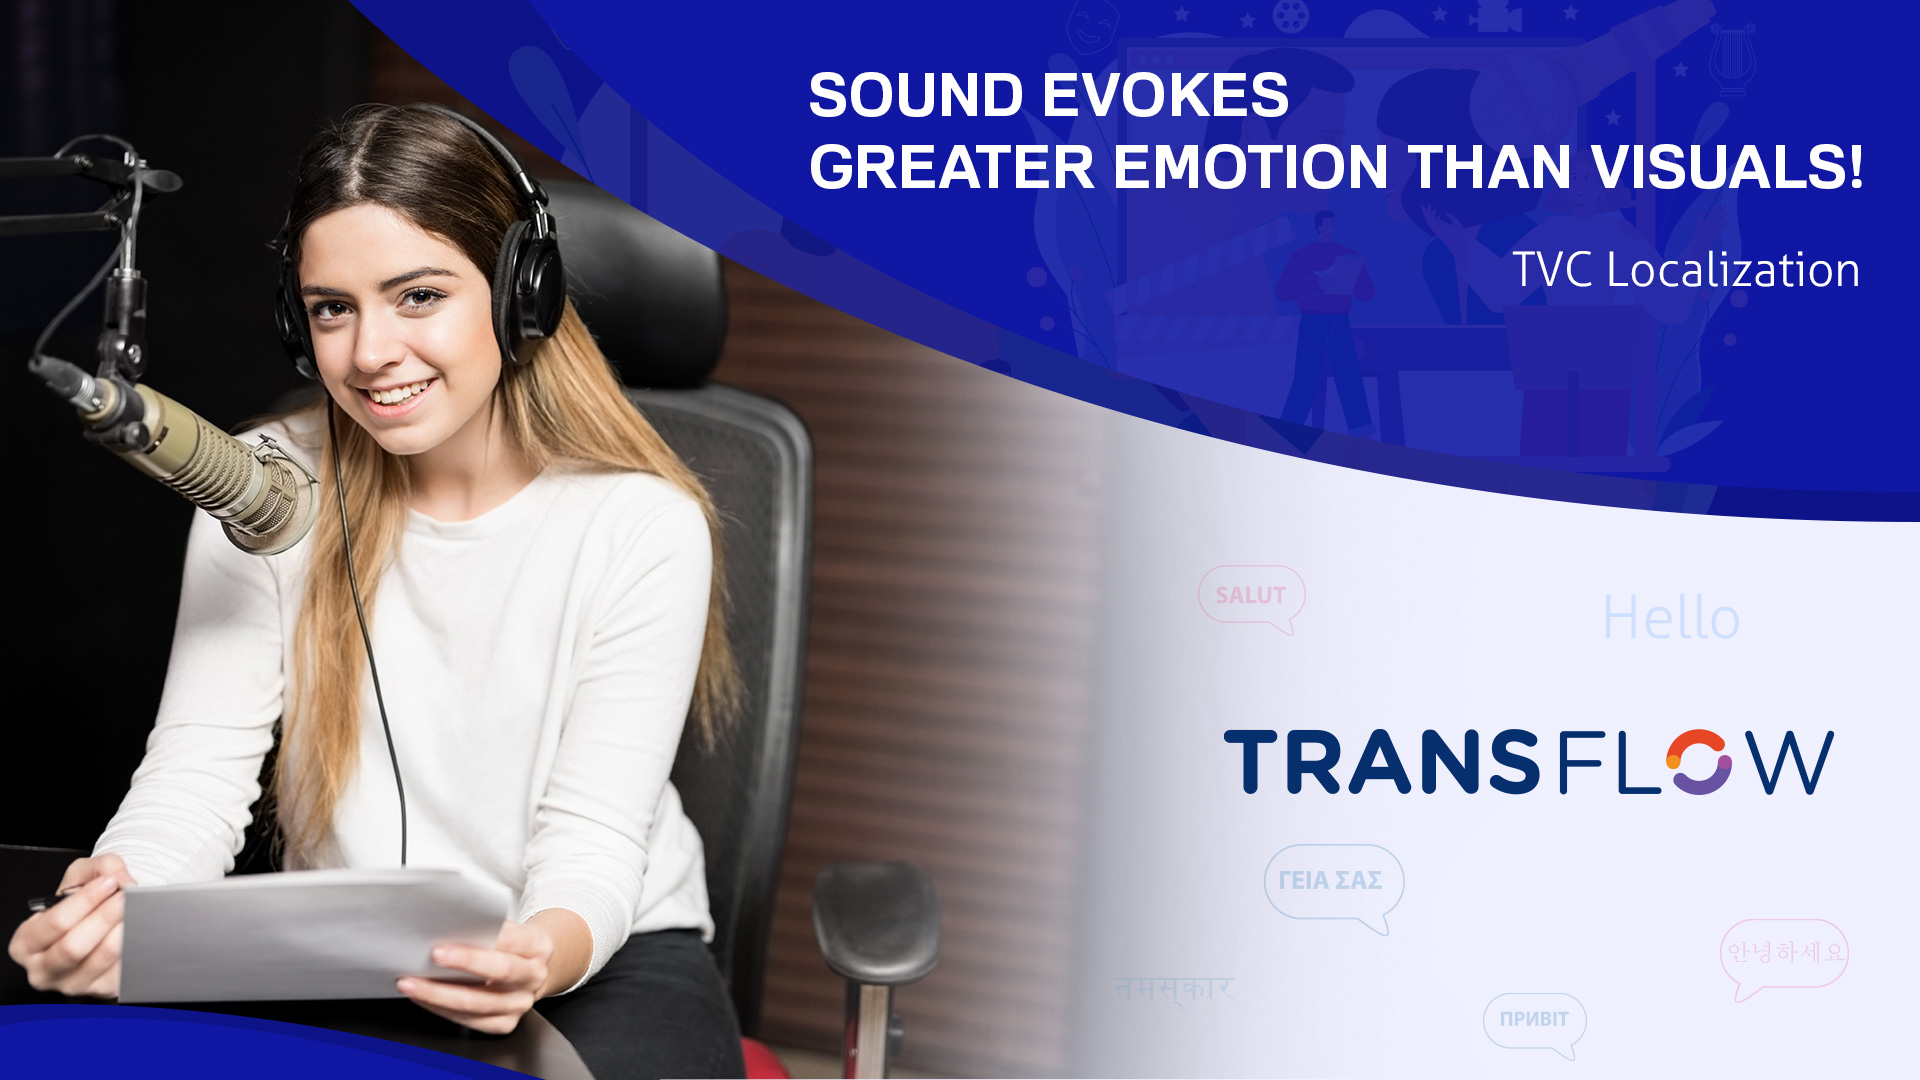 Sound Evokes Greater Emotion than Visuals